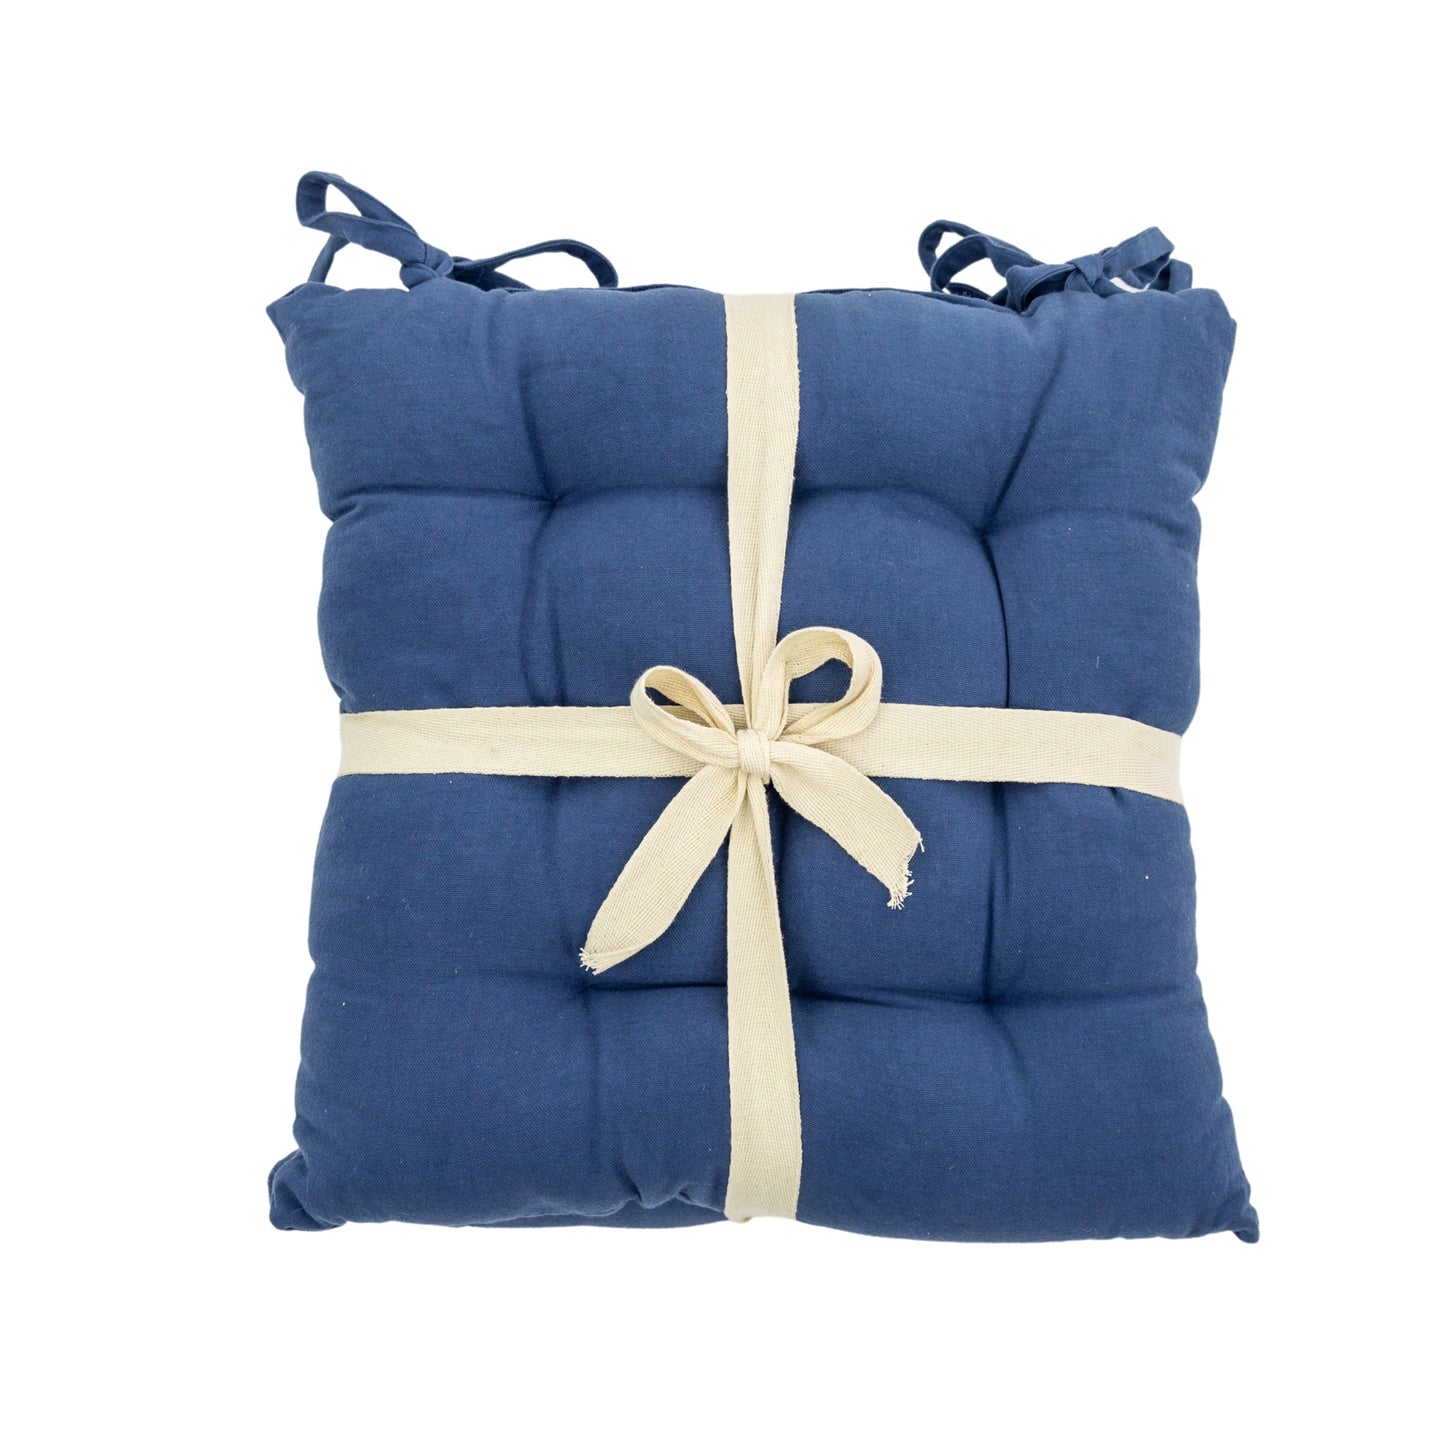 A SC Plain Cotton Seatpad Blue 430x430mm (2pk) for home furniture and interior decor from Kikiathome.co.uk.